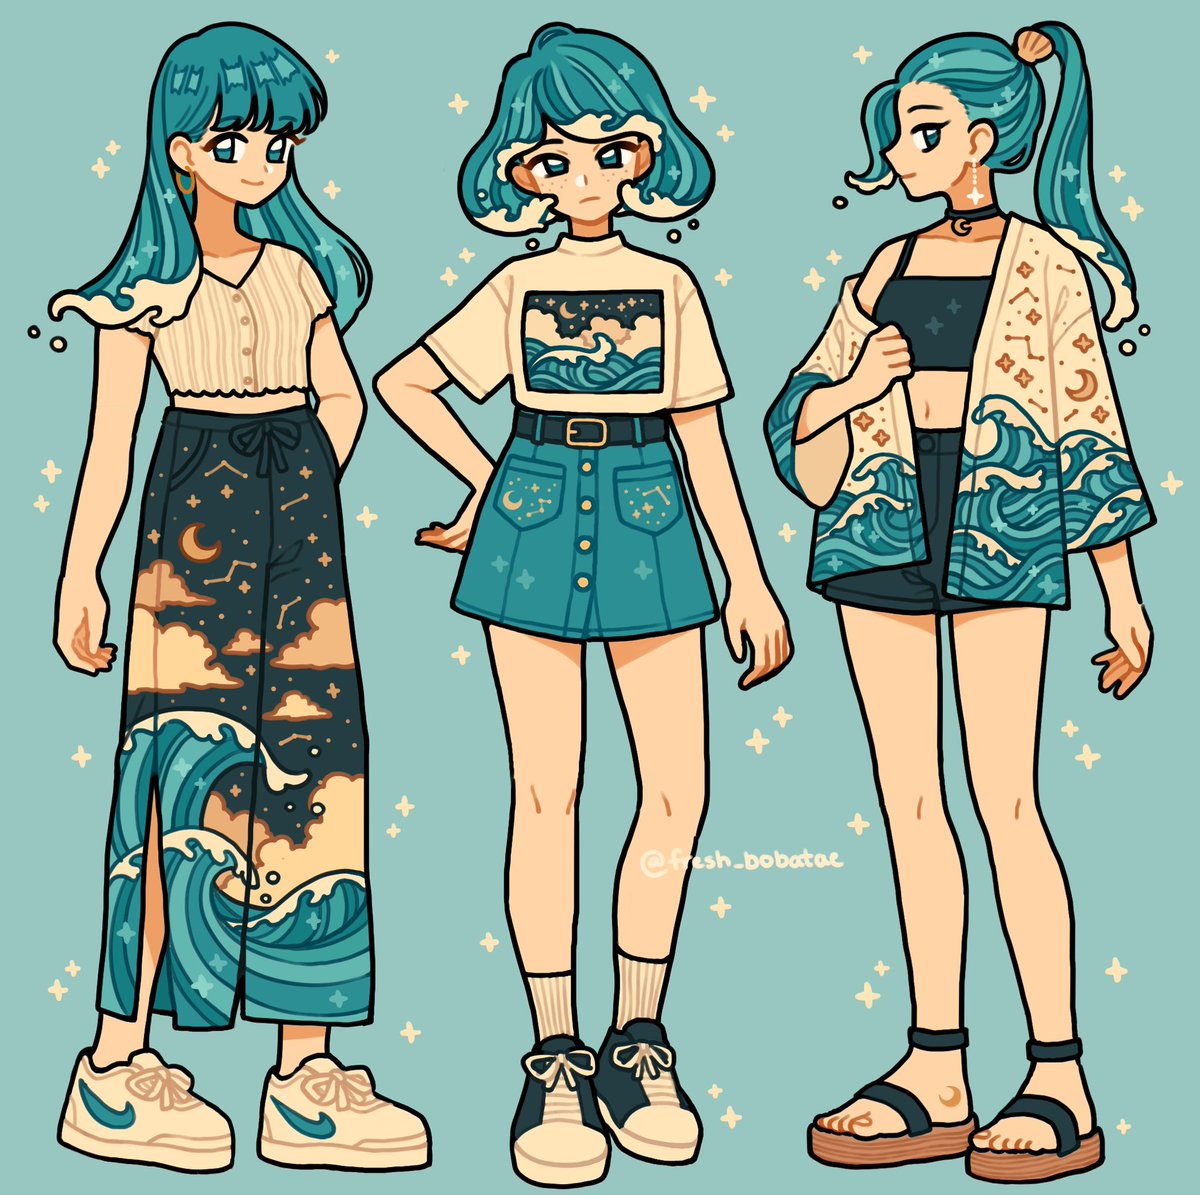 「Old outfit art💕 」|Emily 🍊🧡のイラスト